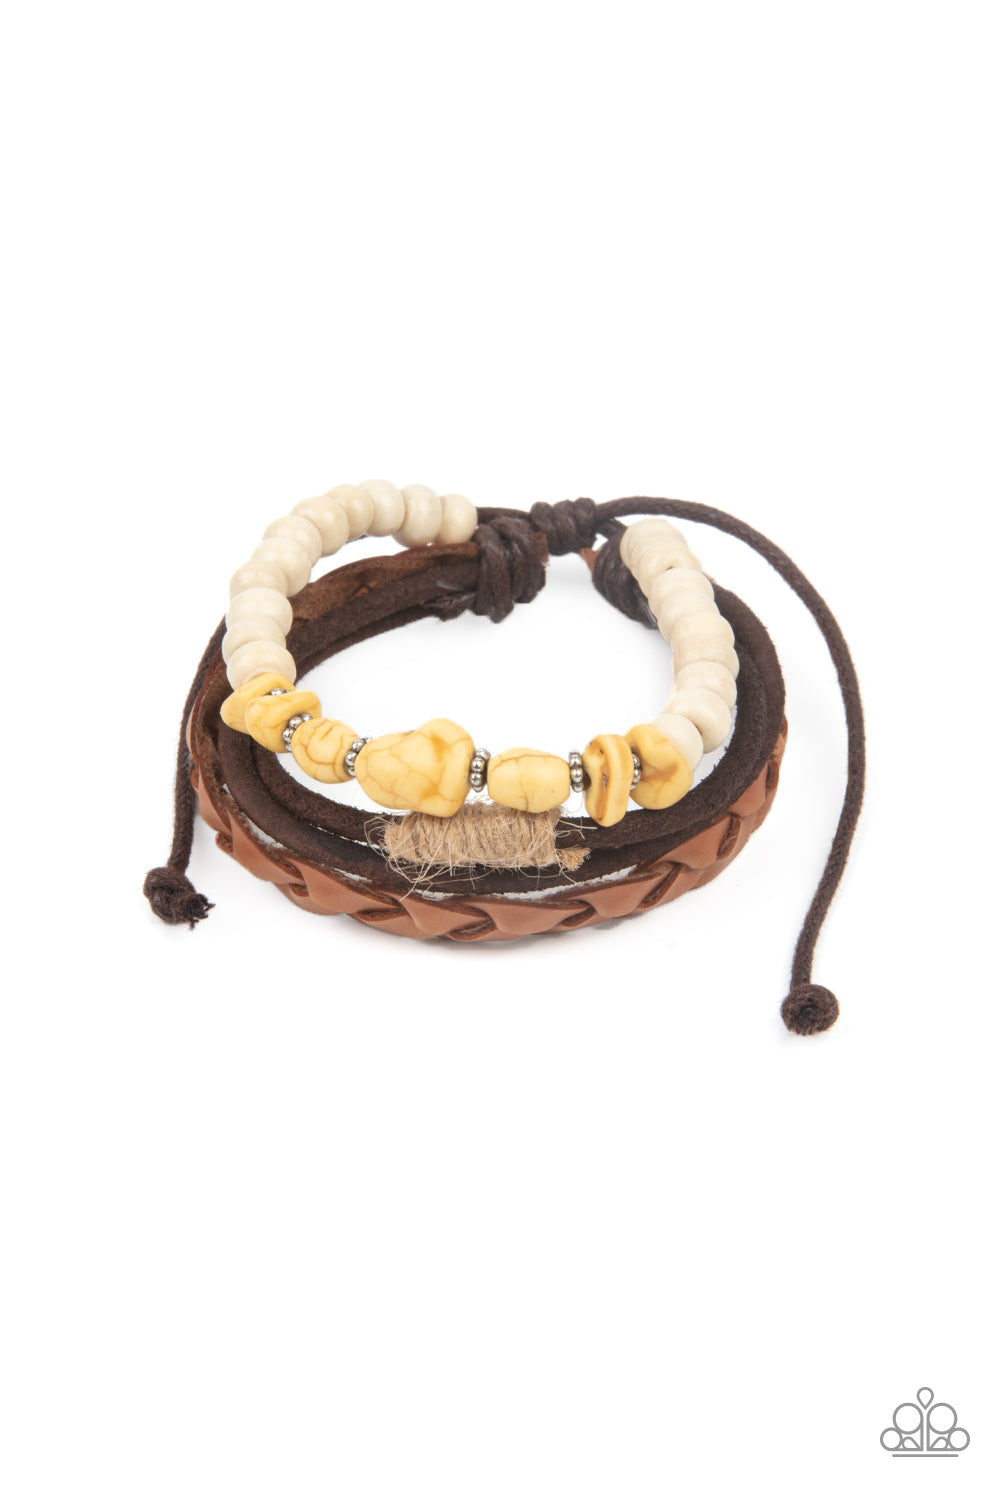 Far Out Wayfair Yellow Urban Bracelet - Paparazzi Accessories  Mismatched strands of brown suede, braided brown leather, and yellow stones and white wooden beads layer across the wrist for a colorful seasonal look. Features an adjustable sliding knot closure.  Sold as one individual bracelet.